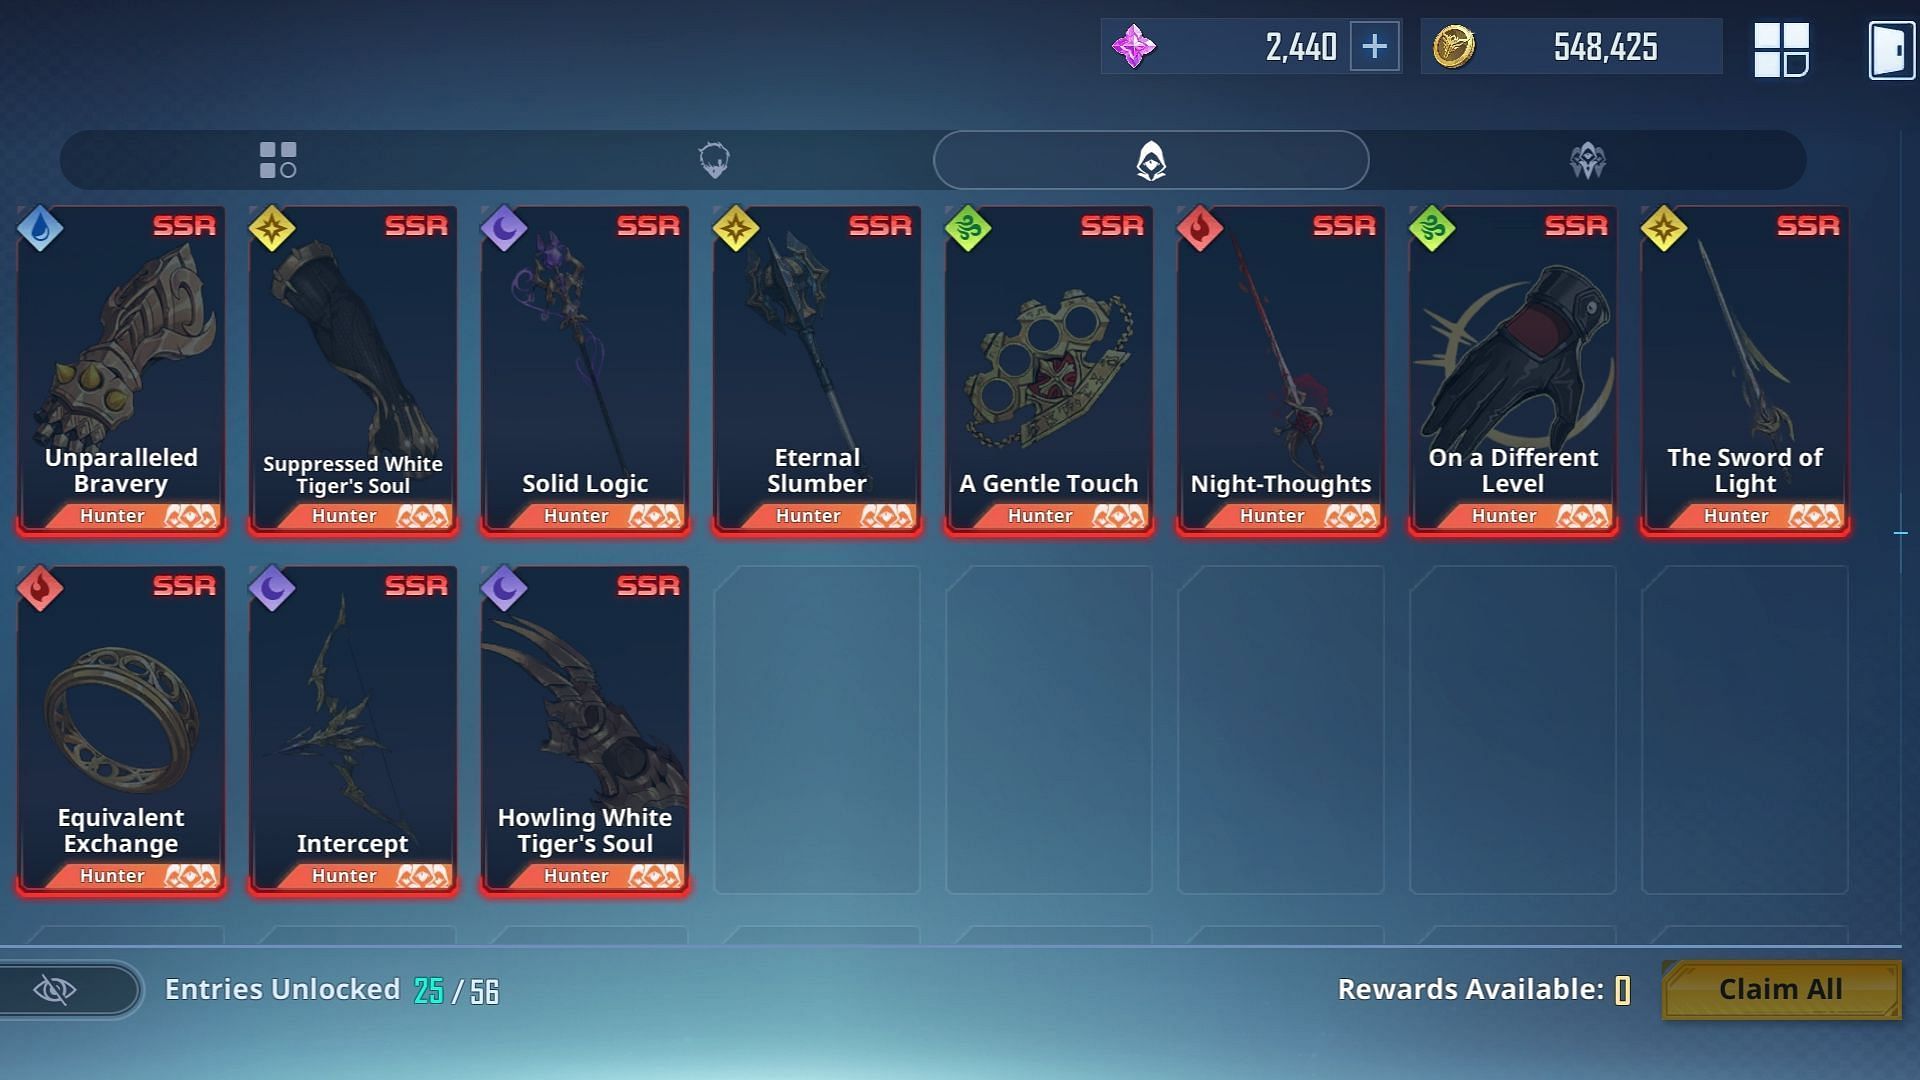 Players can currently craft all SSR weapons of Hunters (Image via Netmarble)